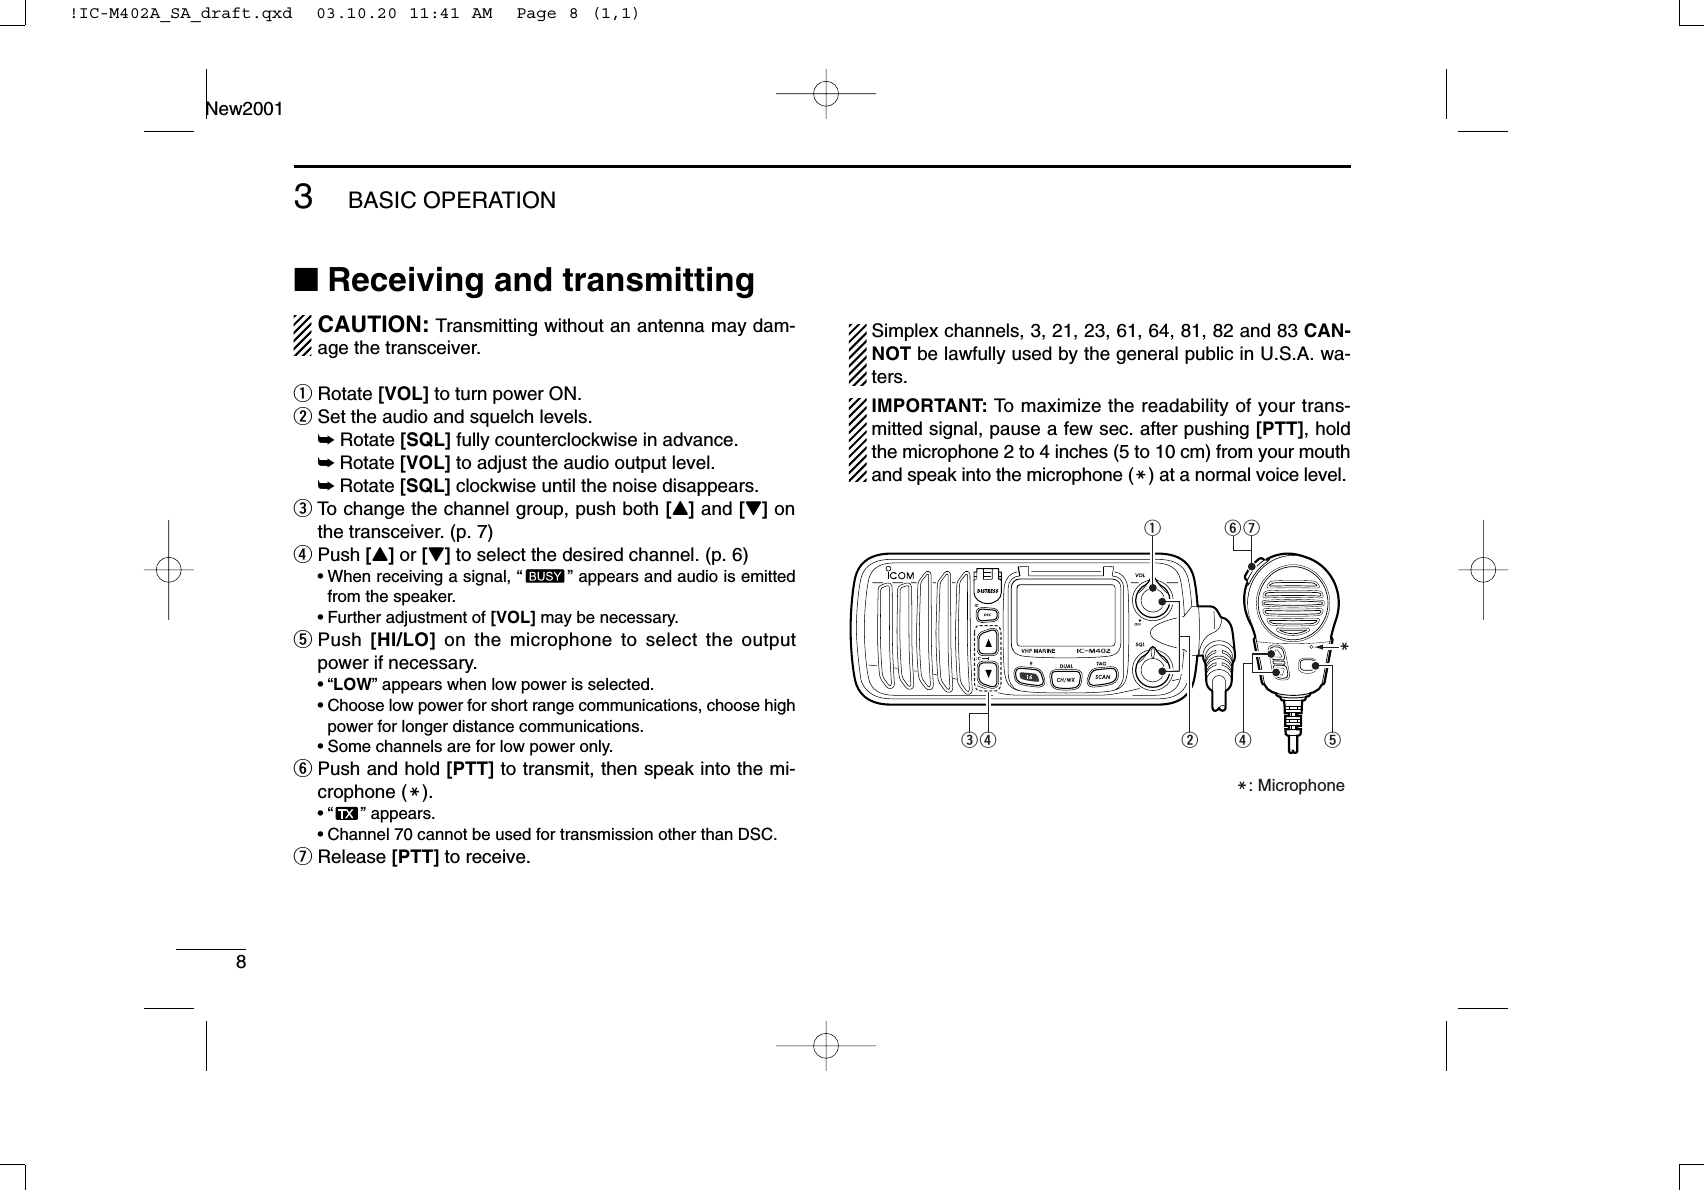 83BASIC OPERATIONNew2001■Receiving and transmittingCAUTION: Transmitting without an antenna may dam-age the transceiver.qRotate [VOL] to turn power ON.wSet the audio and squelch levels.➥Rotate [SQL] fully counterclockwise in advance.➥Rotate [VOL] to adjust the audio output level.➥Rotate [SQL] clockwise until the noise disappears.eTo change the channel group, push both [Y]and [Z]onthe transceiver. (p. 7)rPush [Y]or [Z]to select the desired channel. (p. 6)•When receiving a signal, “” appears and audio is emittedfrom the speaker.•Further adjustment of [VOL] may be necessary.tPush  [HI/LO] on the microphone to select the outputpower if necessary.•“LOW” appears when low power is selected.•Choose low power for short range communications, choose highpower for longer distance communications.•Some channels are for low power only.yPush and hold [PTT] to transmit, then speak into the mi-crophone (M).•“ ” appears.•Channel 70 cannot be used for transmission other than DSC.uRelease [PTT] to receive.Simplex channels, 3, 21, 23, 61, 64, 81, 82 and 83 CAN-NOT be lawfully used by the general public in U.S.A. wa-ters.IMPORTANT: To maximize the readability of your trans-mitted signal, pause a few sec. after pushing [PTT], holdthe microphone 2 to 4 inches (5 to 10 cm) from your mouthand speak into the microphone (M) at a normal voice level.urtMyqM: Microphonewre!IC-M402A_SA_draft.qxd  03.10.20 11:41 AM  Page 8 (1,1)